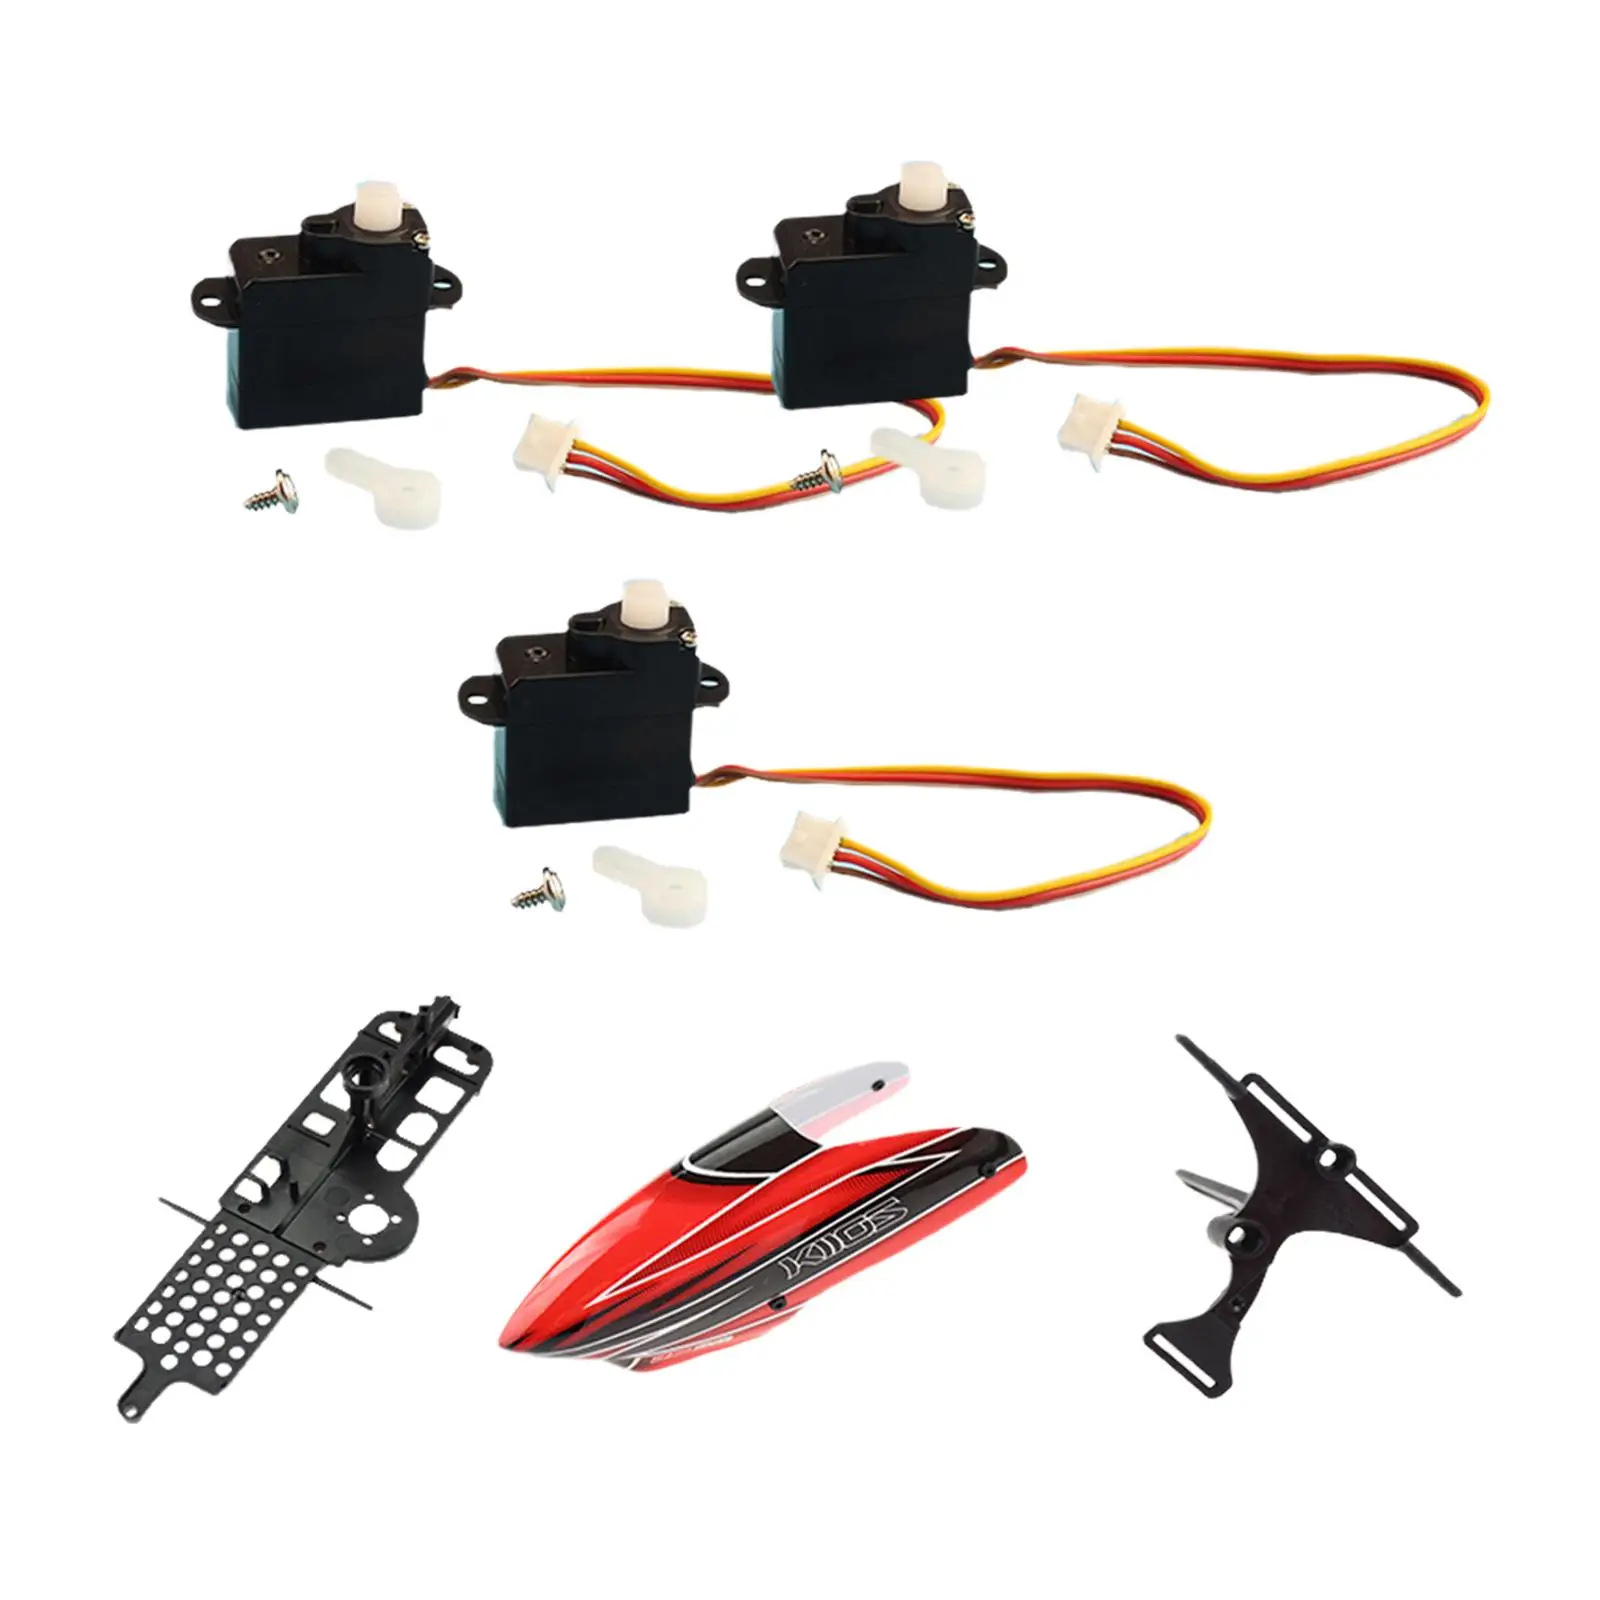 Helicopter Digital RC Servo Remote Control Toys for XK K110 DIY Accessory